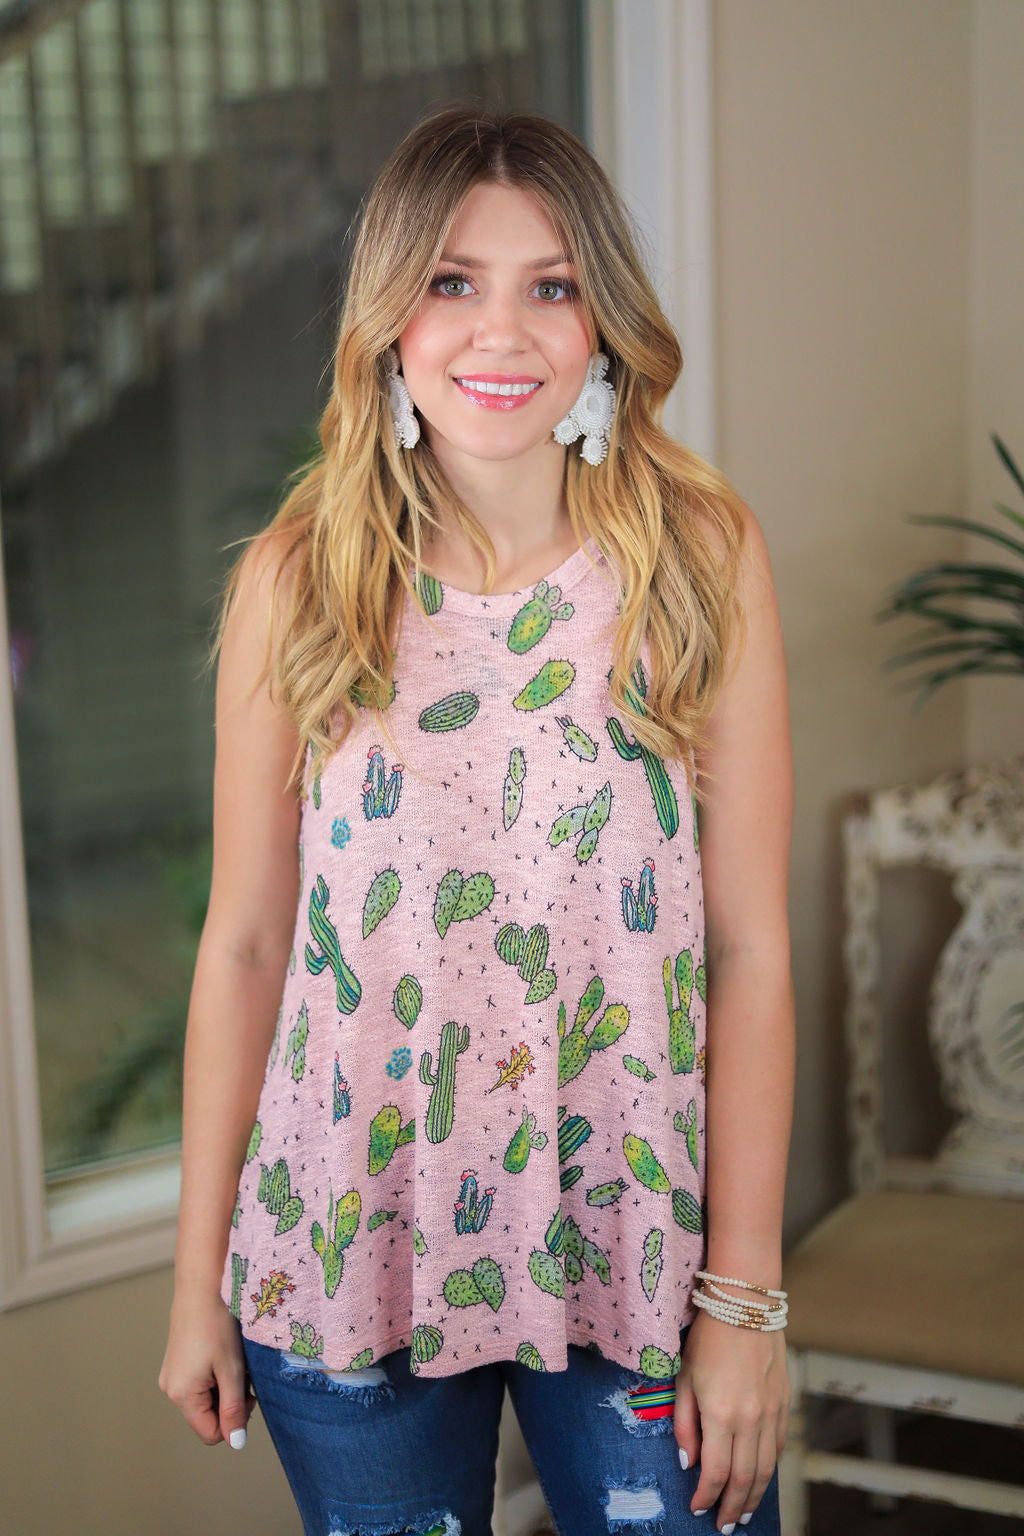 Point Made Cactus Print Halter Tank Top in Light Pink - Giddy Up Glamour Boutique